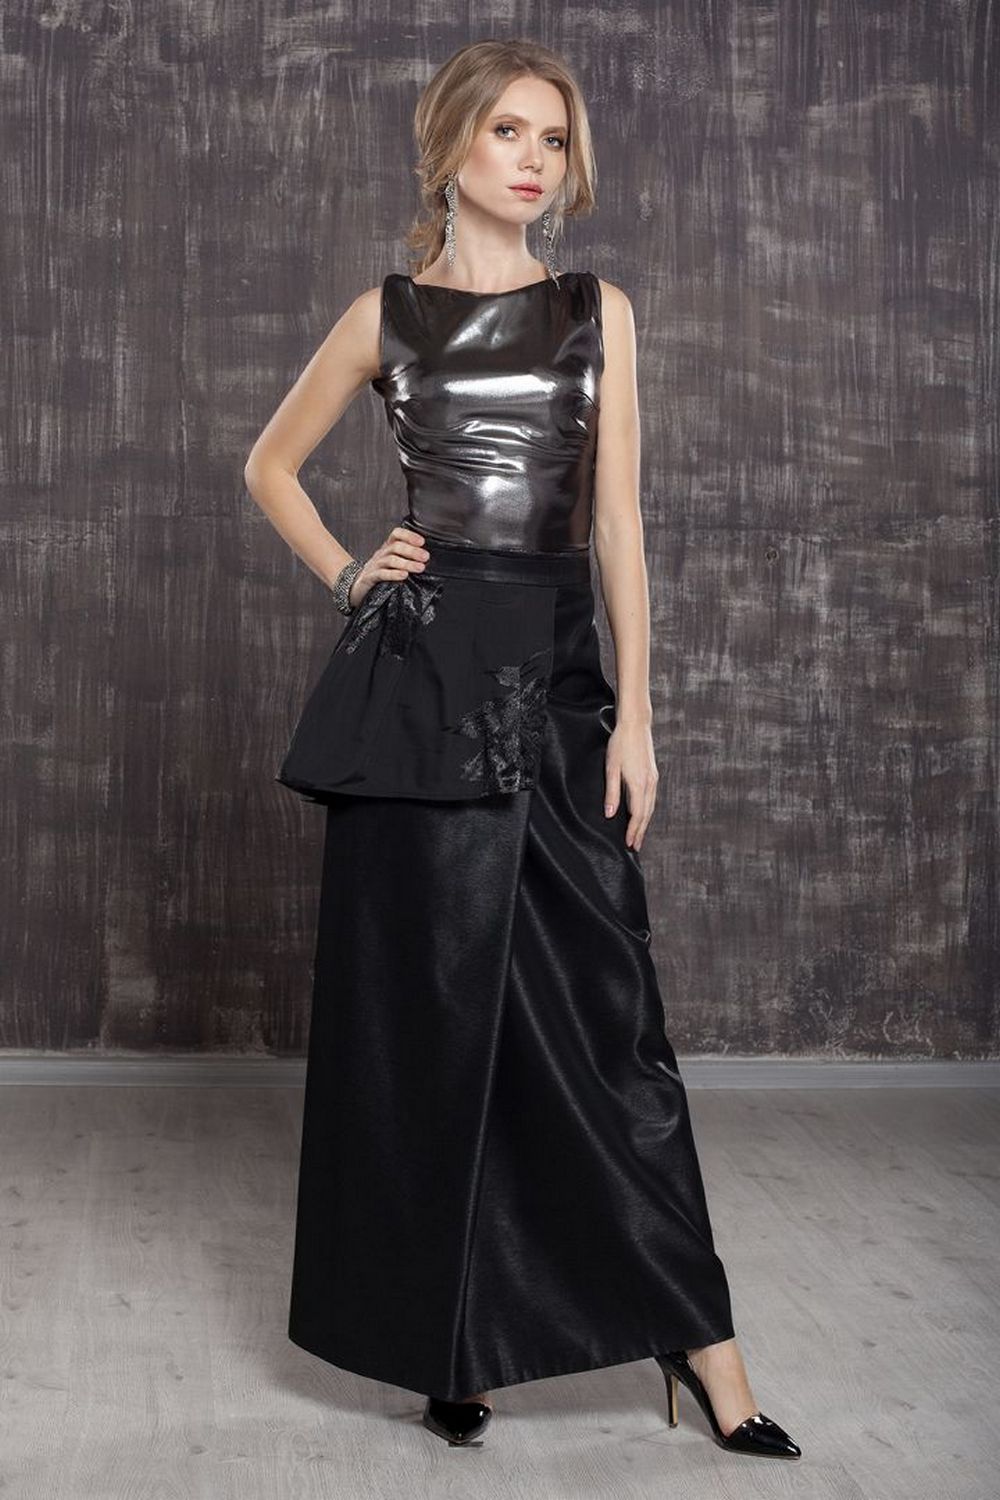 Buy Cocktail Elegant Black women`s suit, Original Set with Long skirt and sleeveless top for party